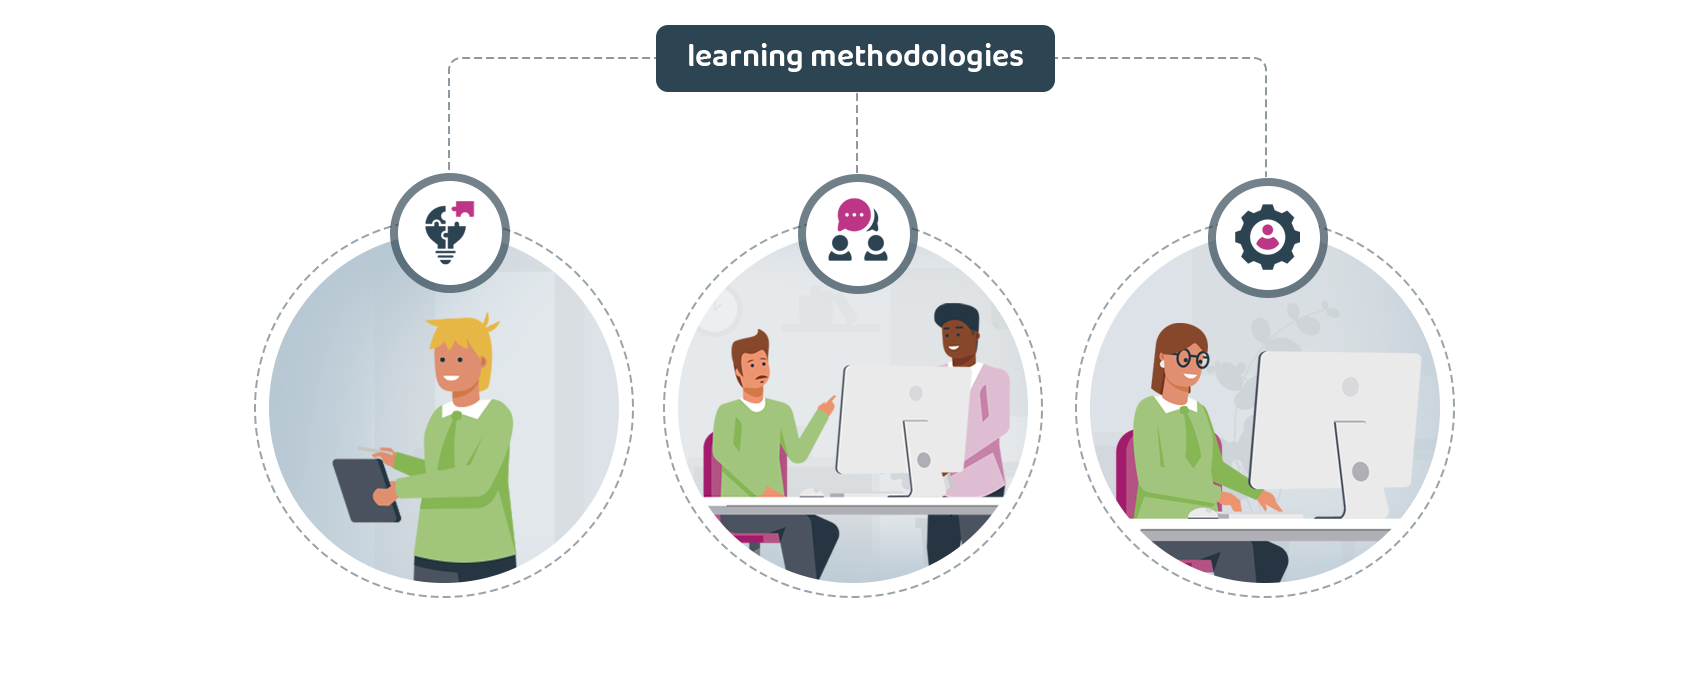 3 learning methodologies to structure and enhance your eLearning